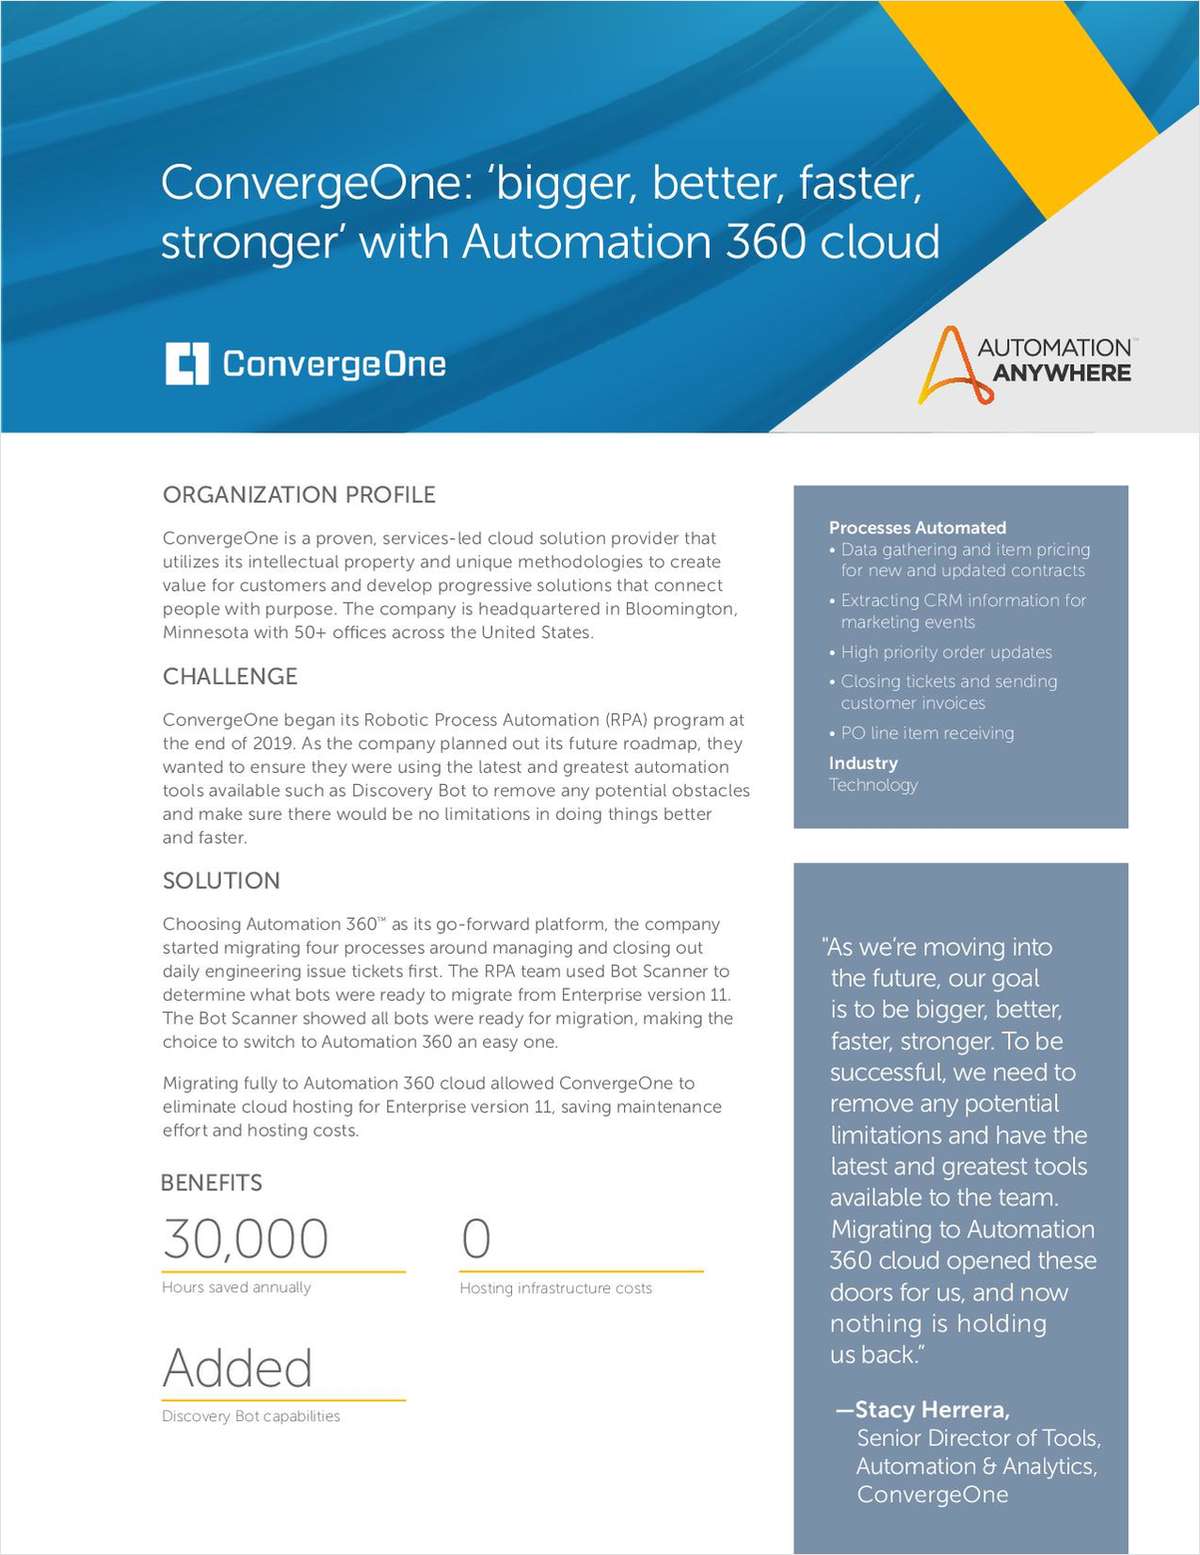 ConvergeOne is 'bigger, better, faster, stronger' with Automation 360 cloud